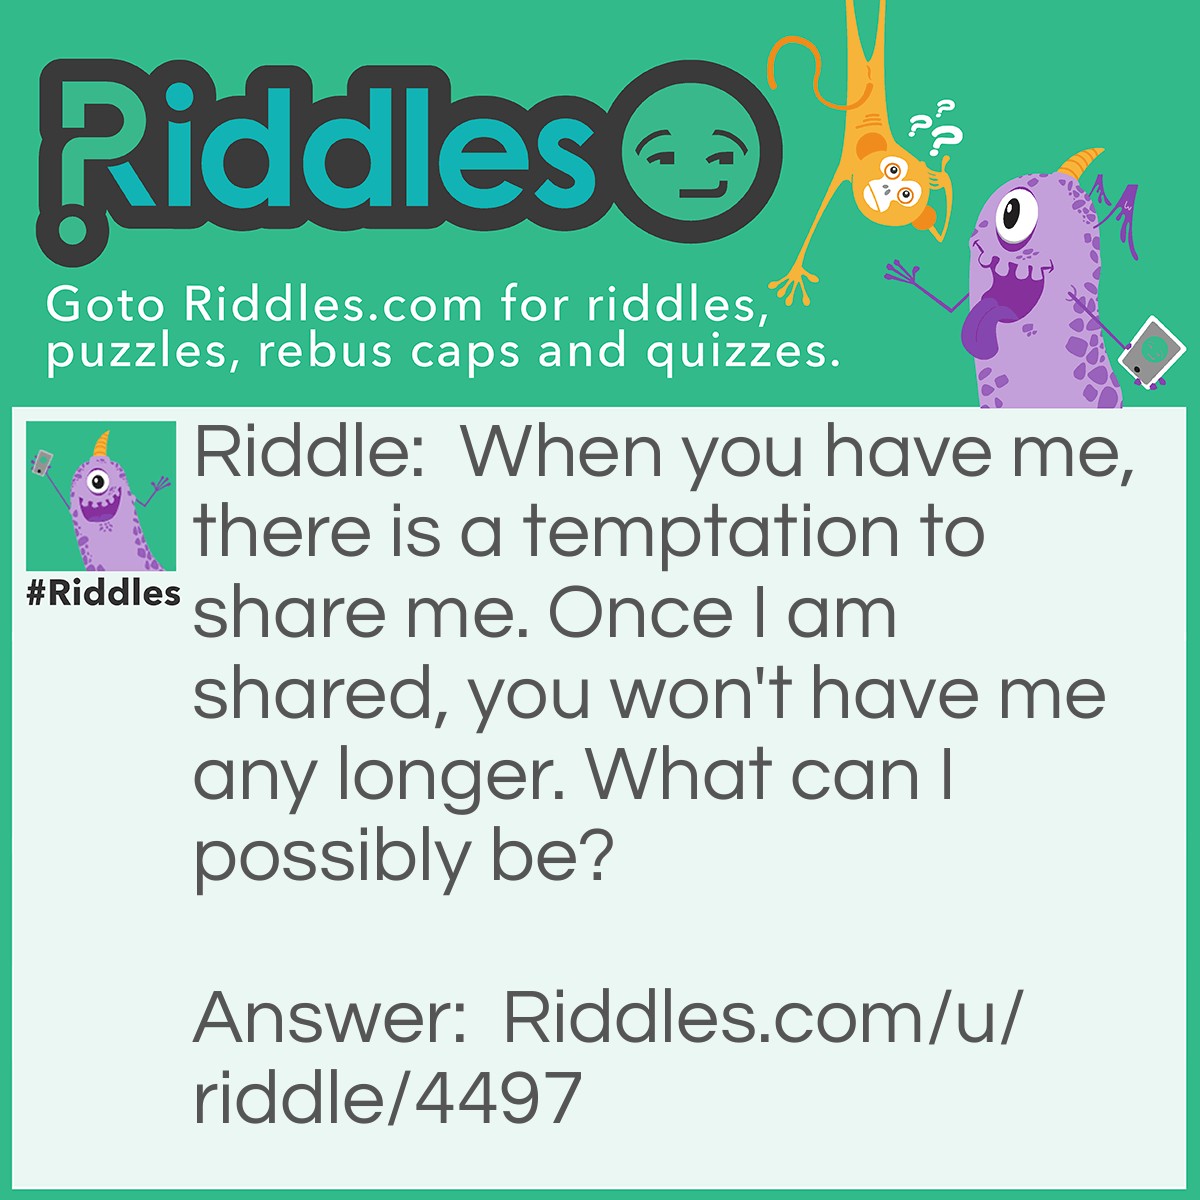 Riddle: When you have me, there is a temptation to share me. Once I am shared, you won't have me any longer. What can I possibly be? Answer: A secret.